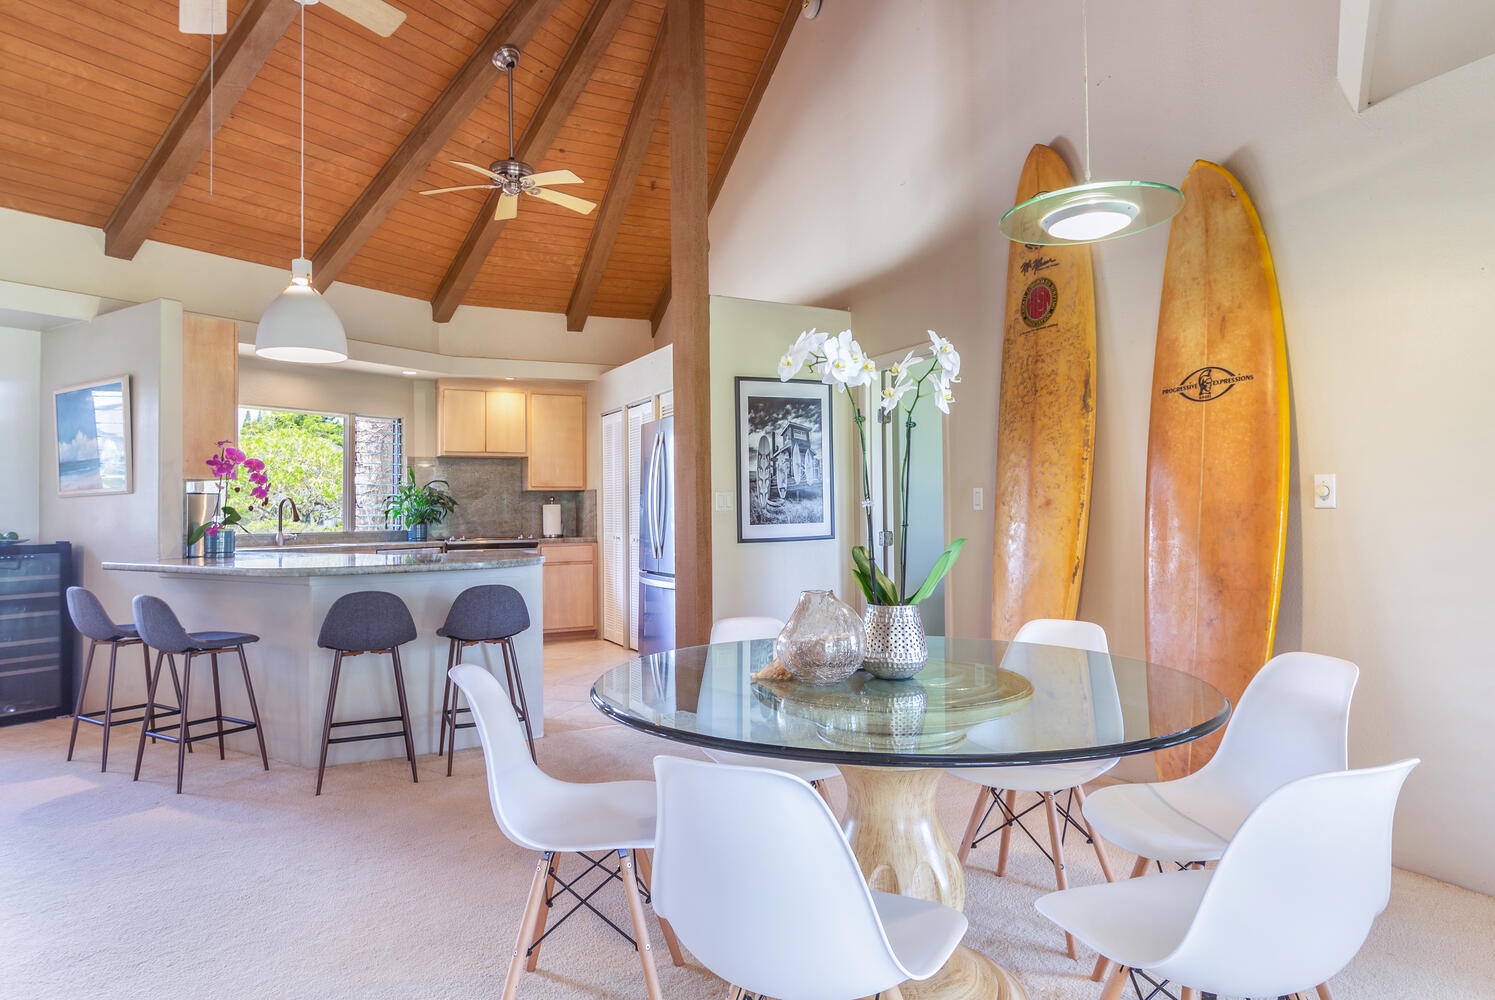 Princeville Vacation Rentals, Wai Puna - Dining area off of kitchen with seating for 6, plus bar seating